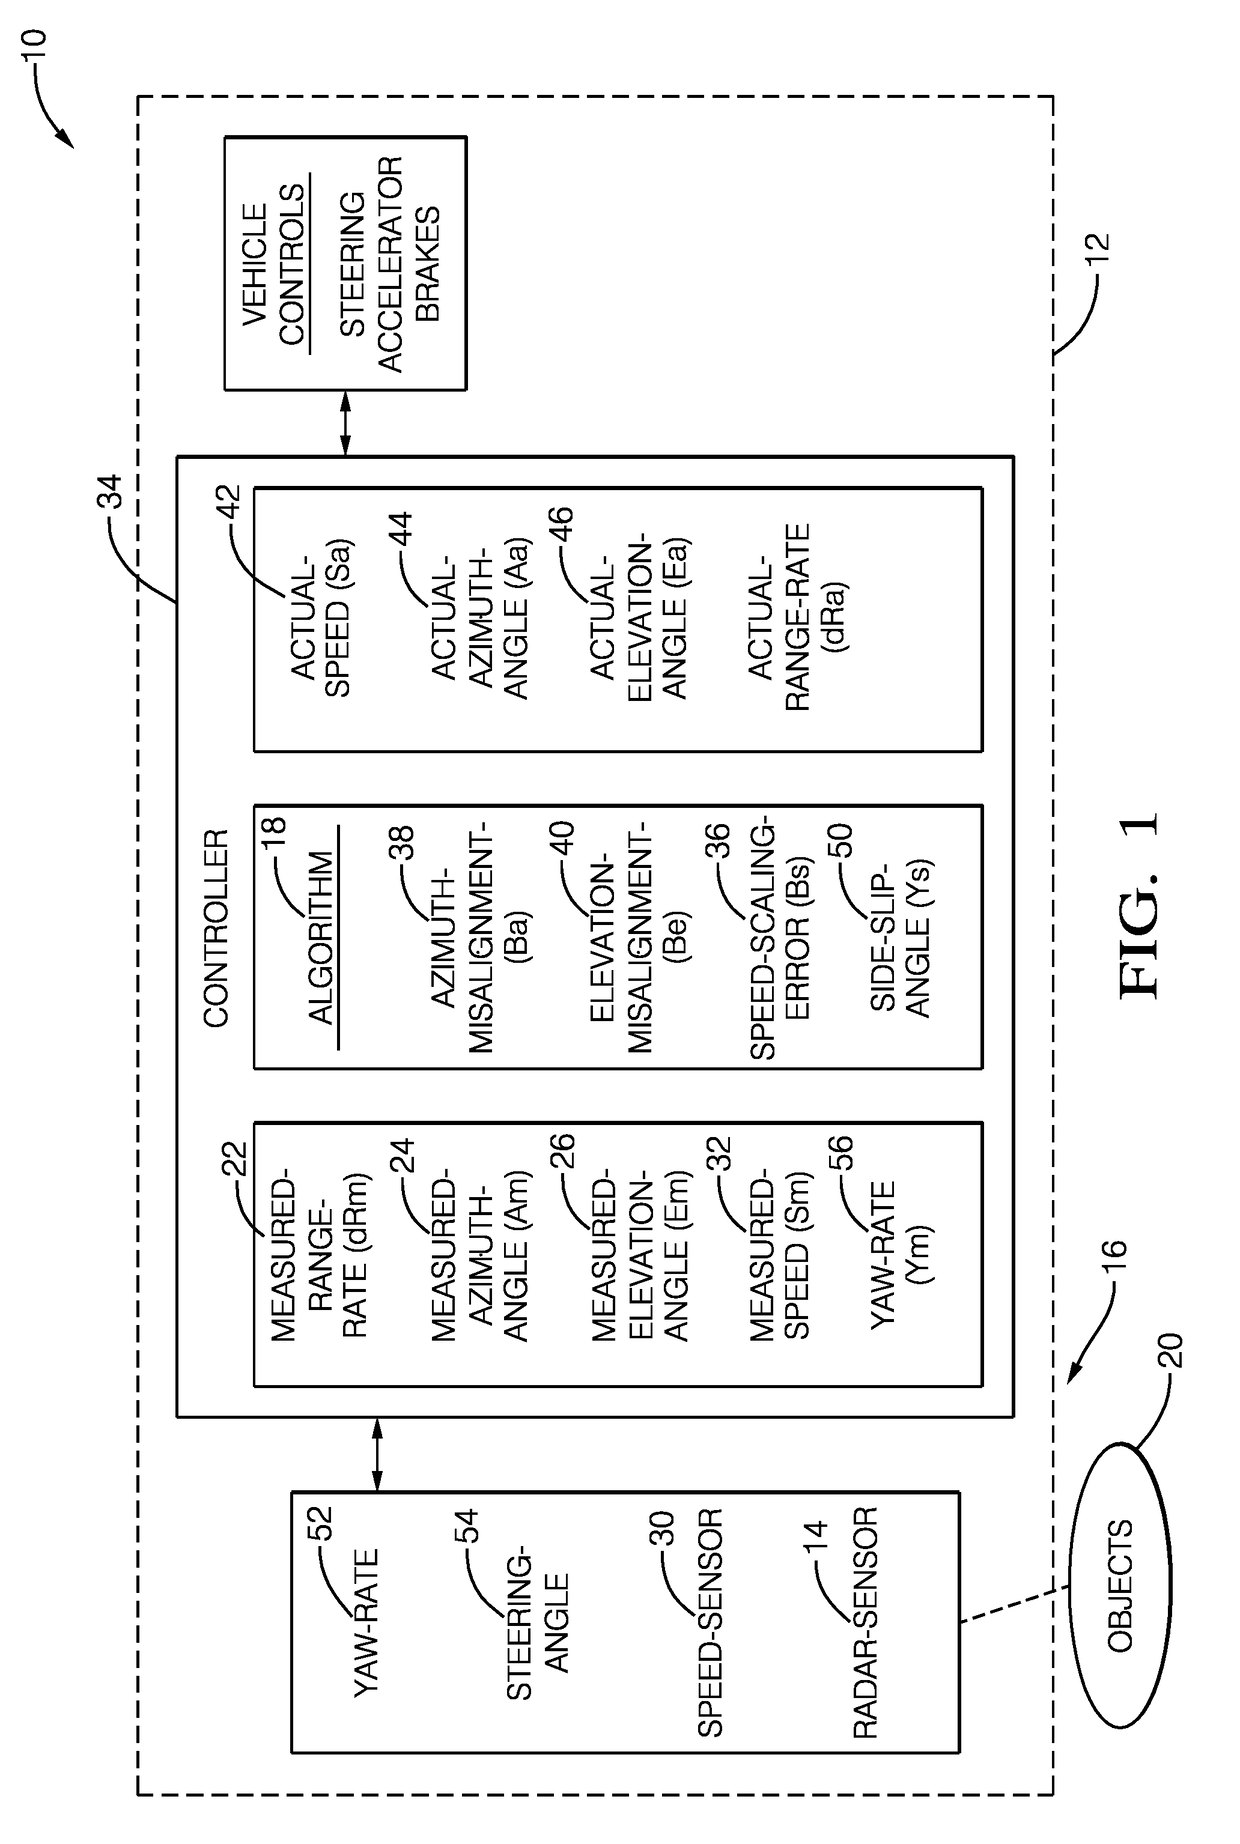 Automated vehicle radar system with auto-alignment for azimuth, elevation, and vehicle speed-scaling-error